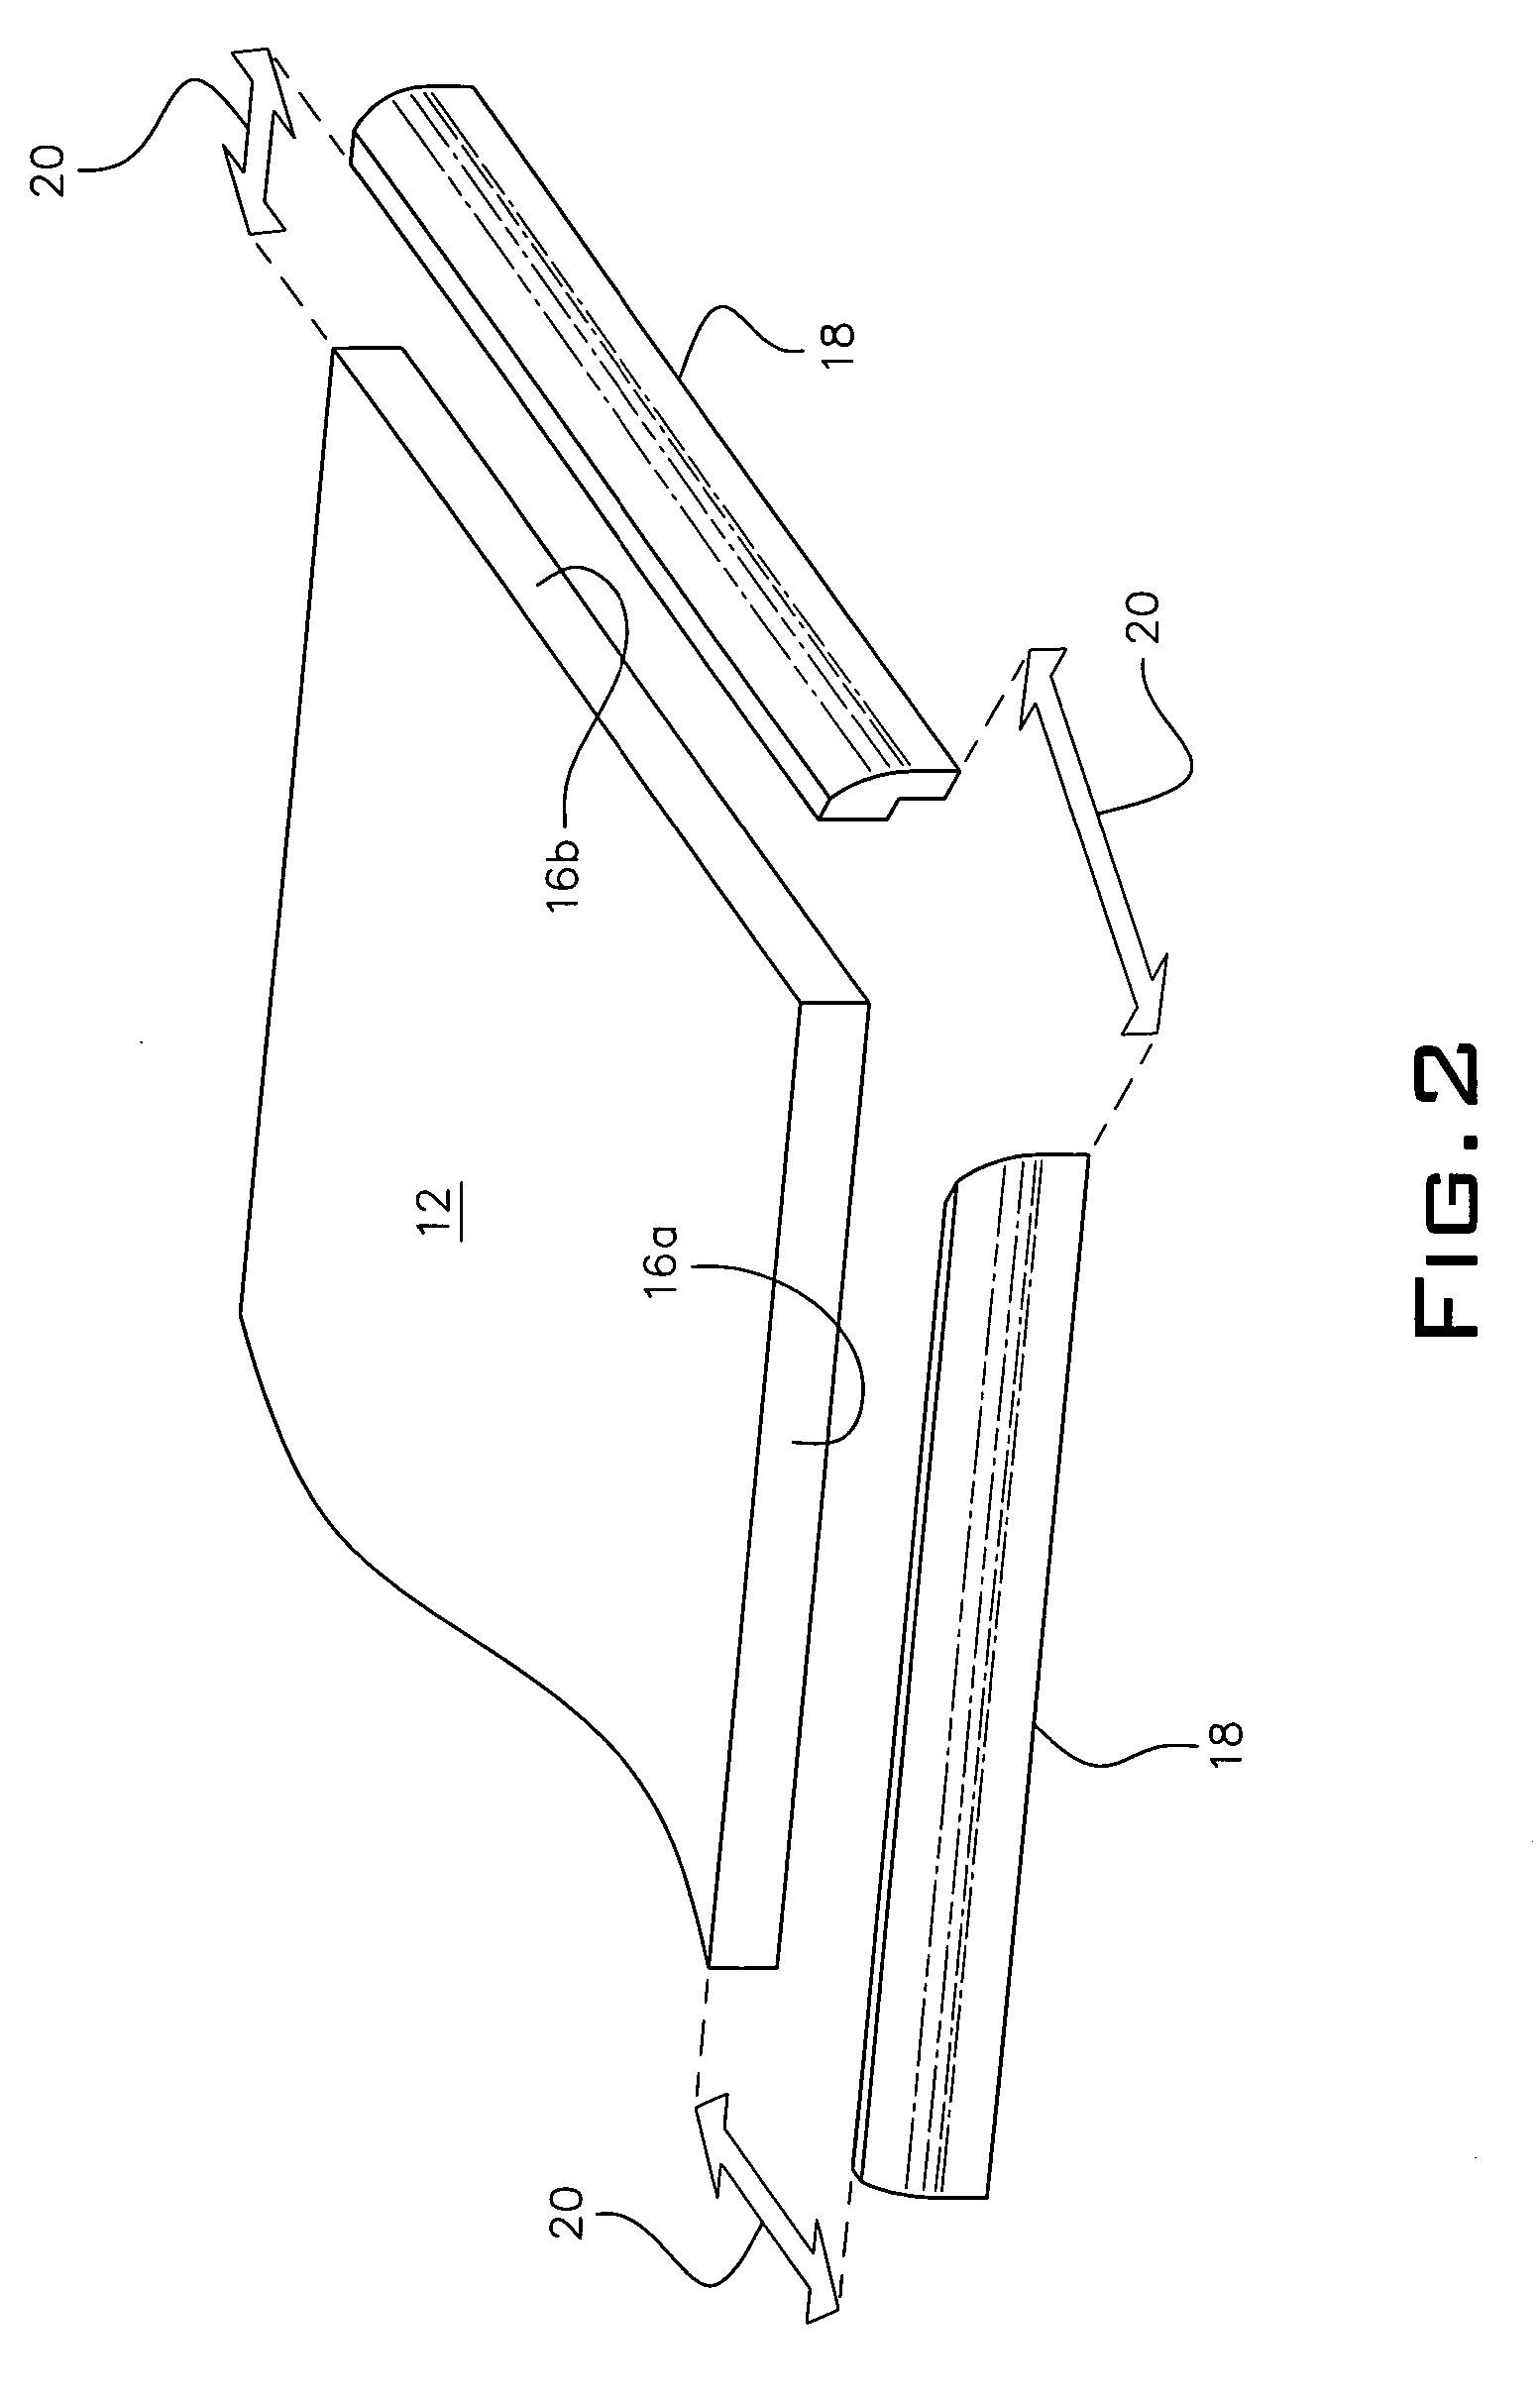 Method for installation of natural stone surfaces